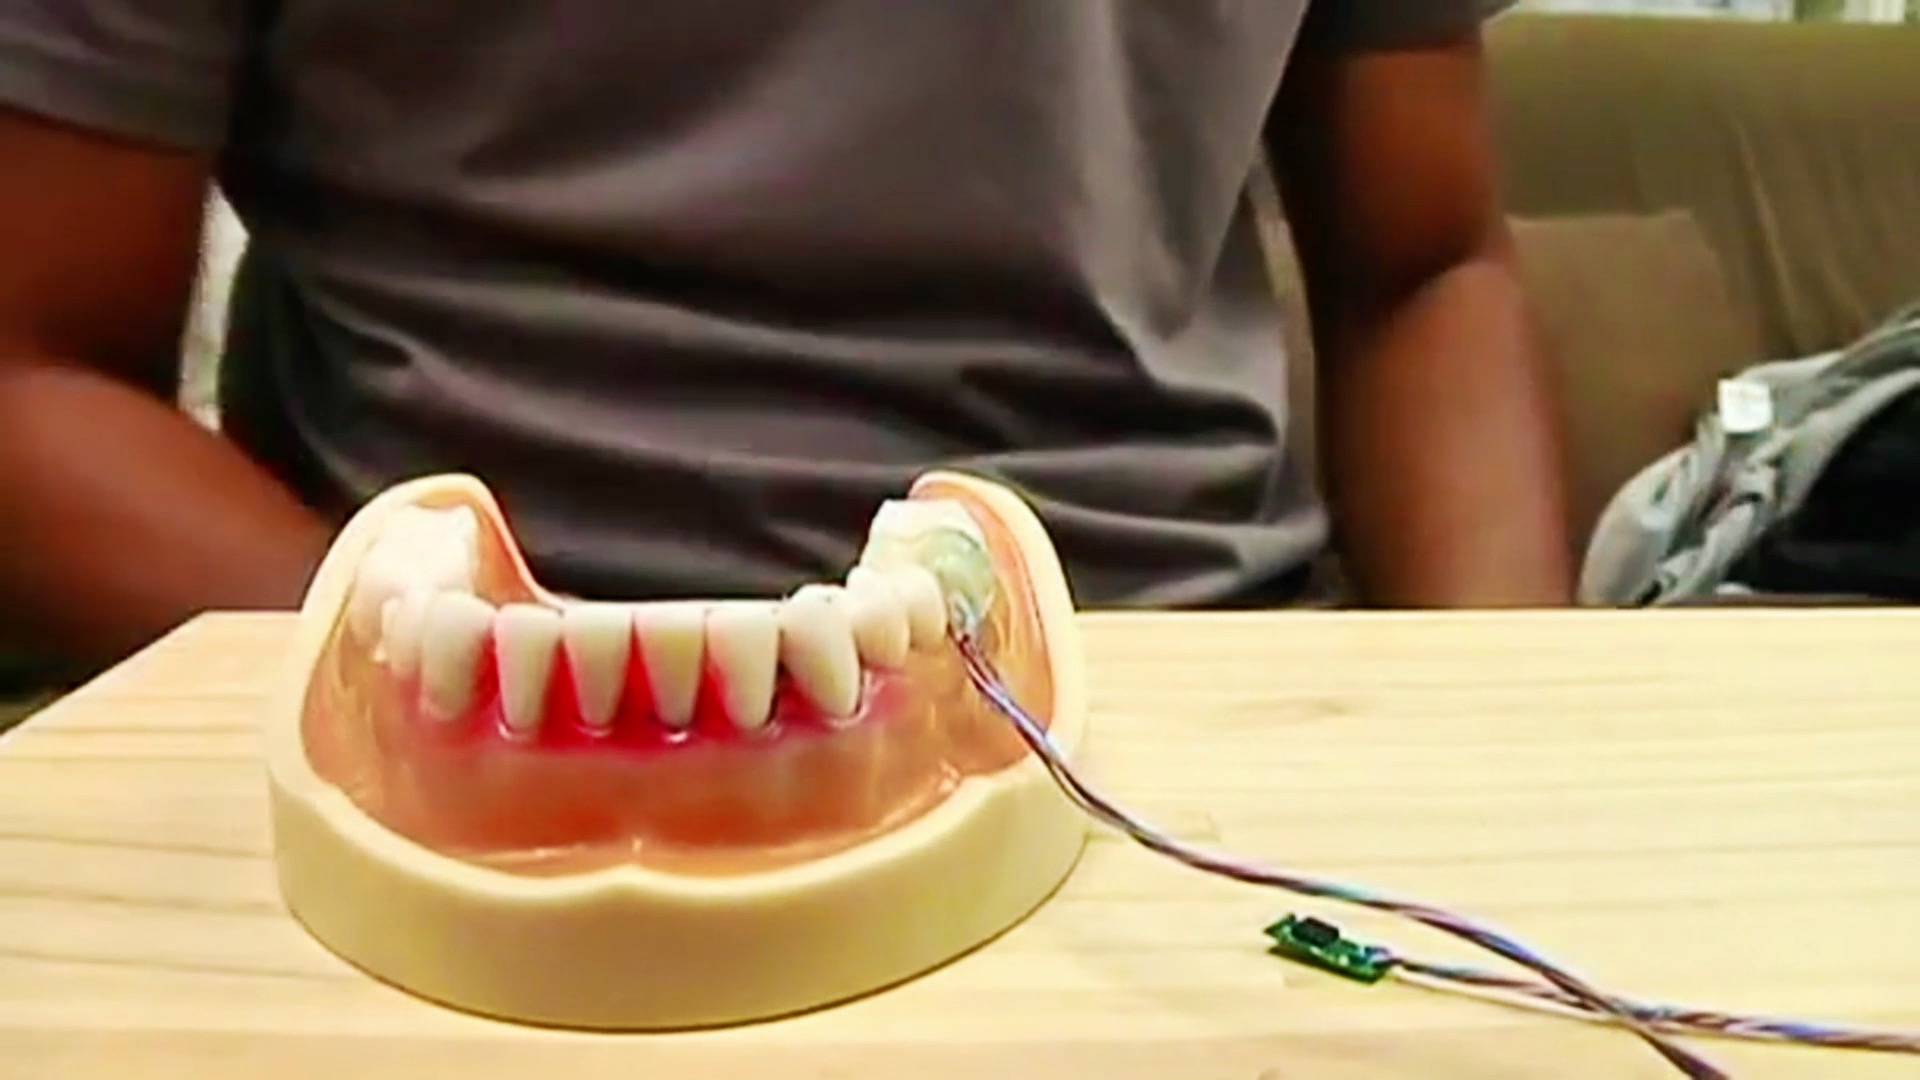 Future Now: The Story of our Teeth